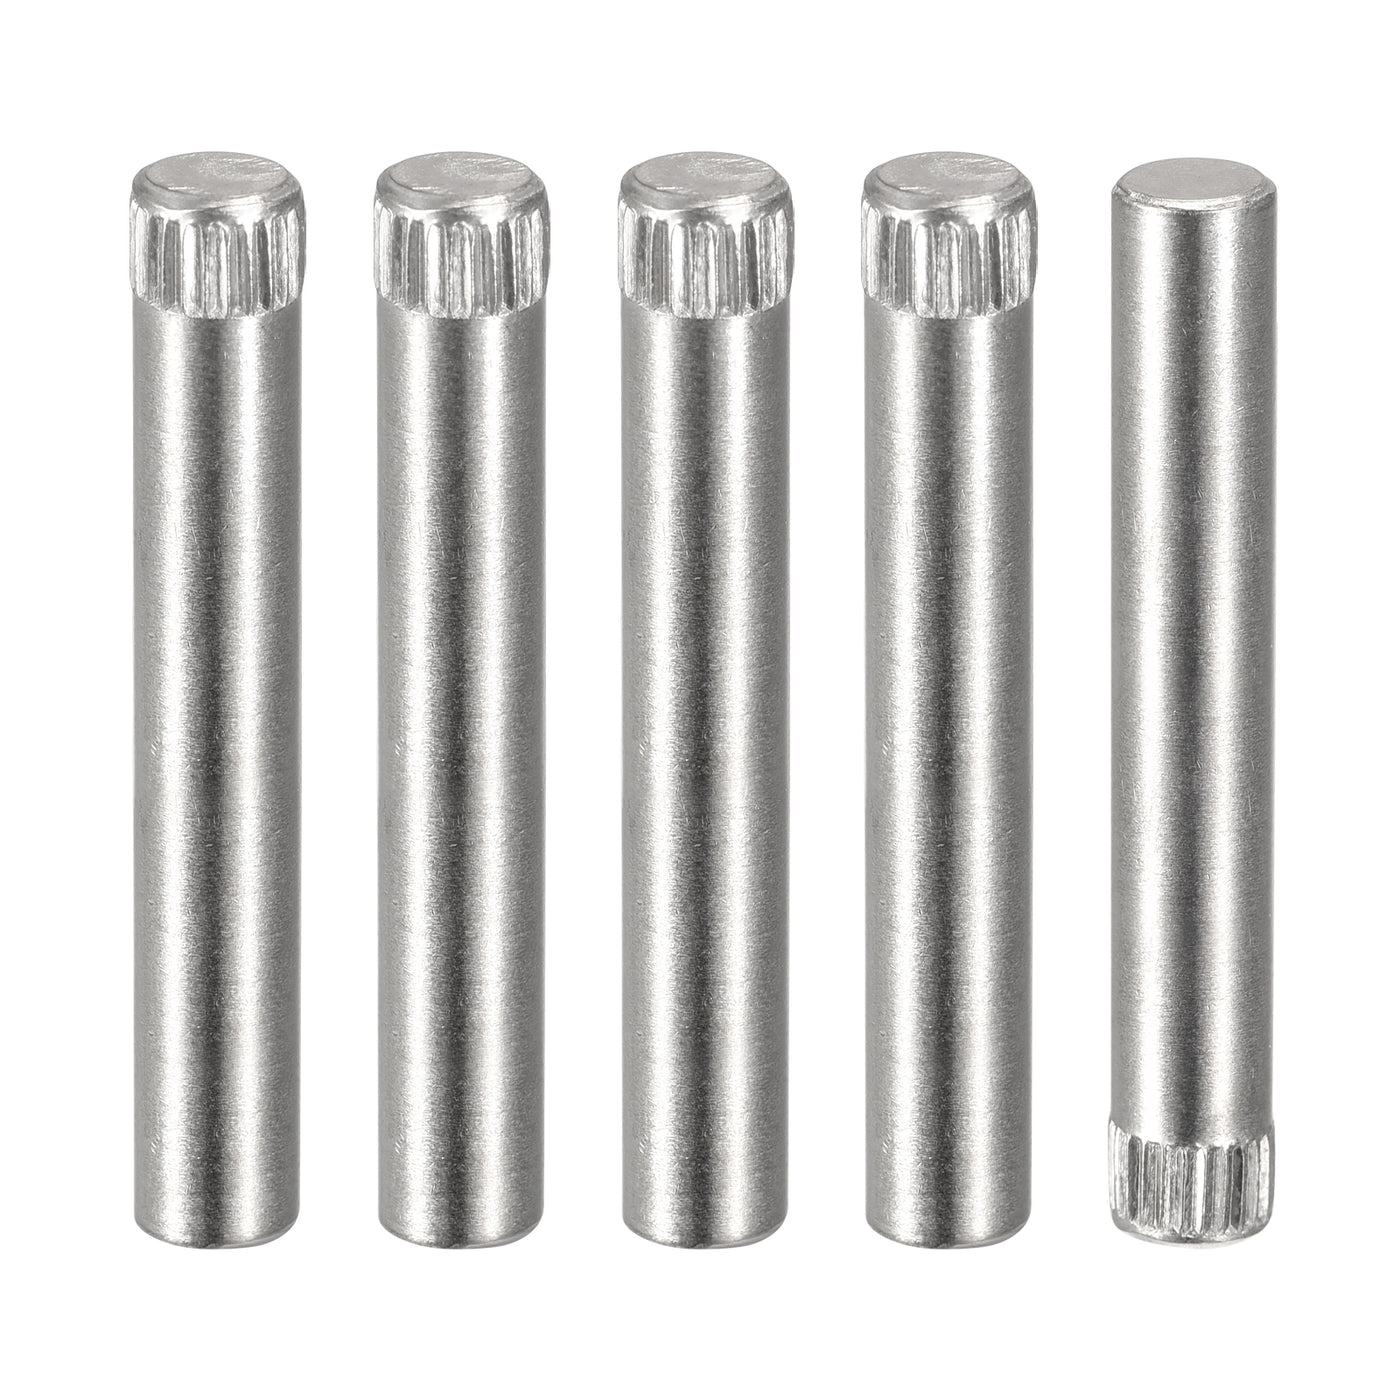 uxcell Uxcell 6x40mm 304 Stainless Steel Dowel Pins, 5Pcs Knurled Head Flat End Dowel Pin